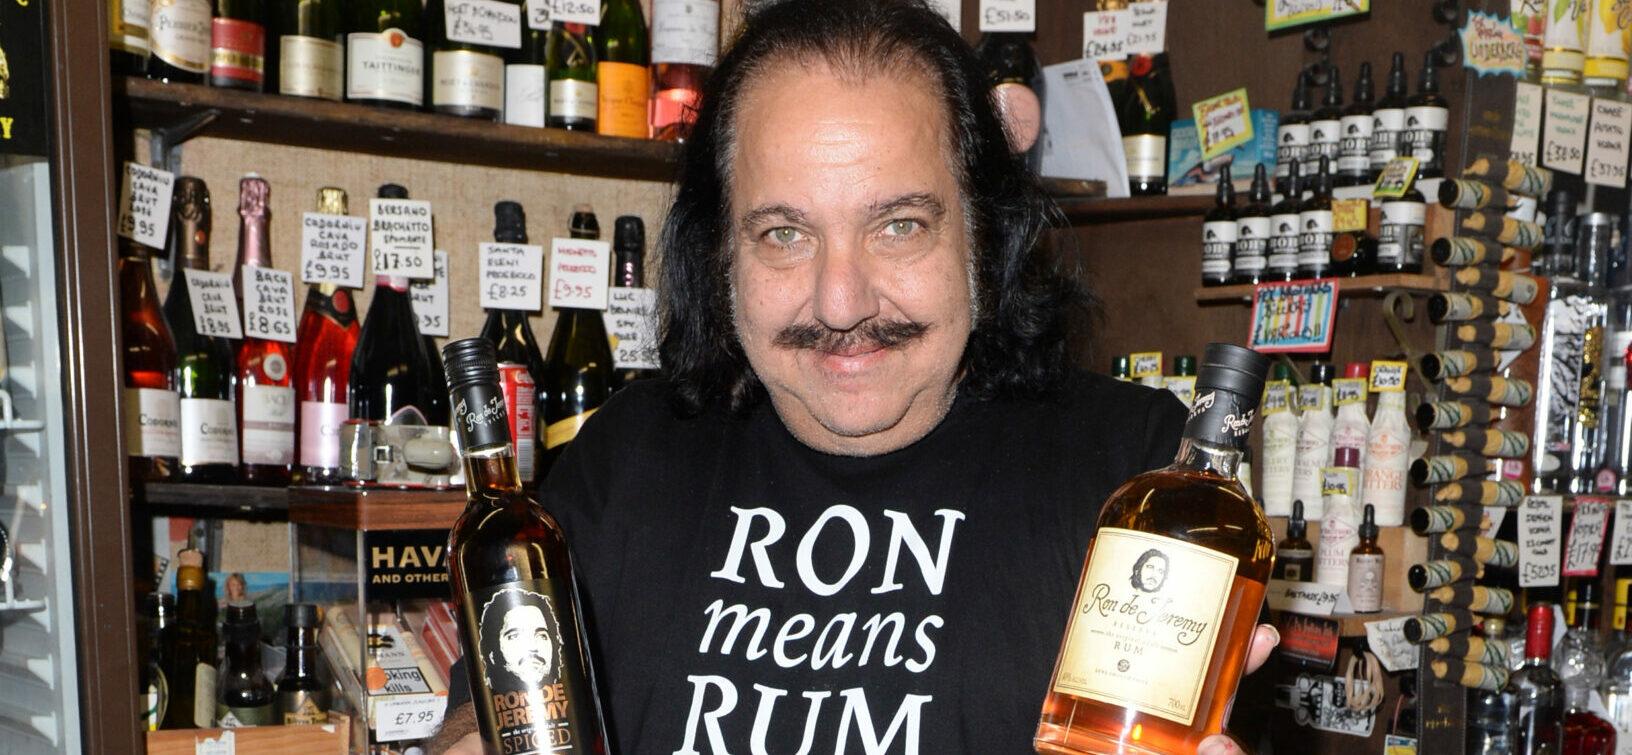 Woman Sues Legendary Rainbow Bar In L.A. For Facilitating Ron Jeremy Sexual Assault